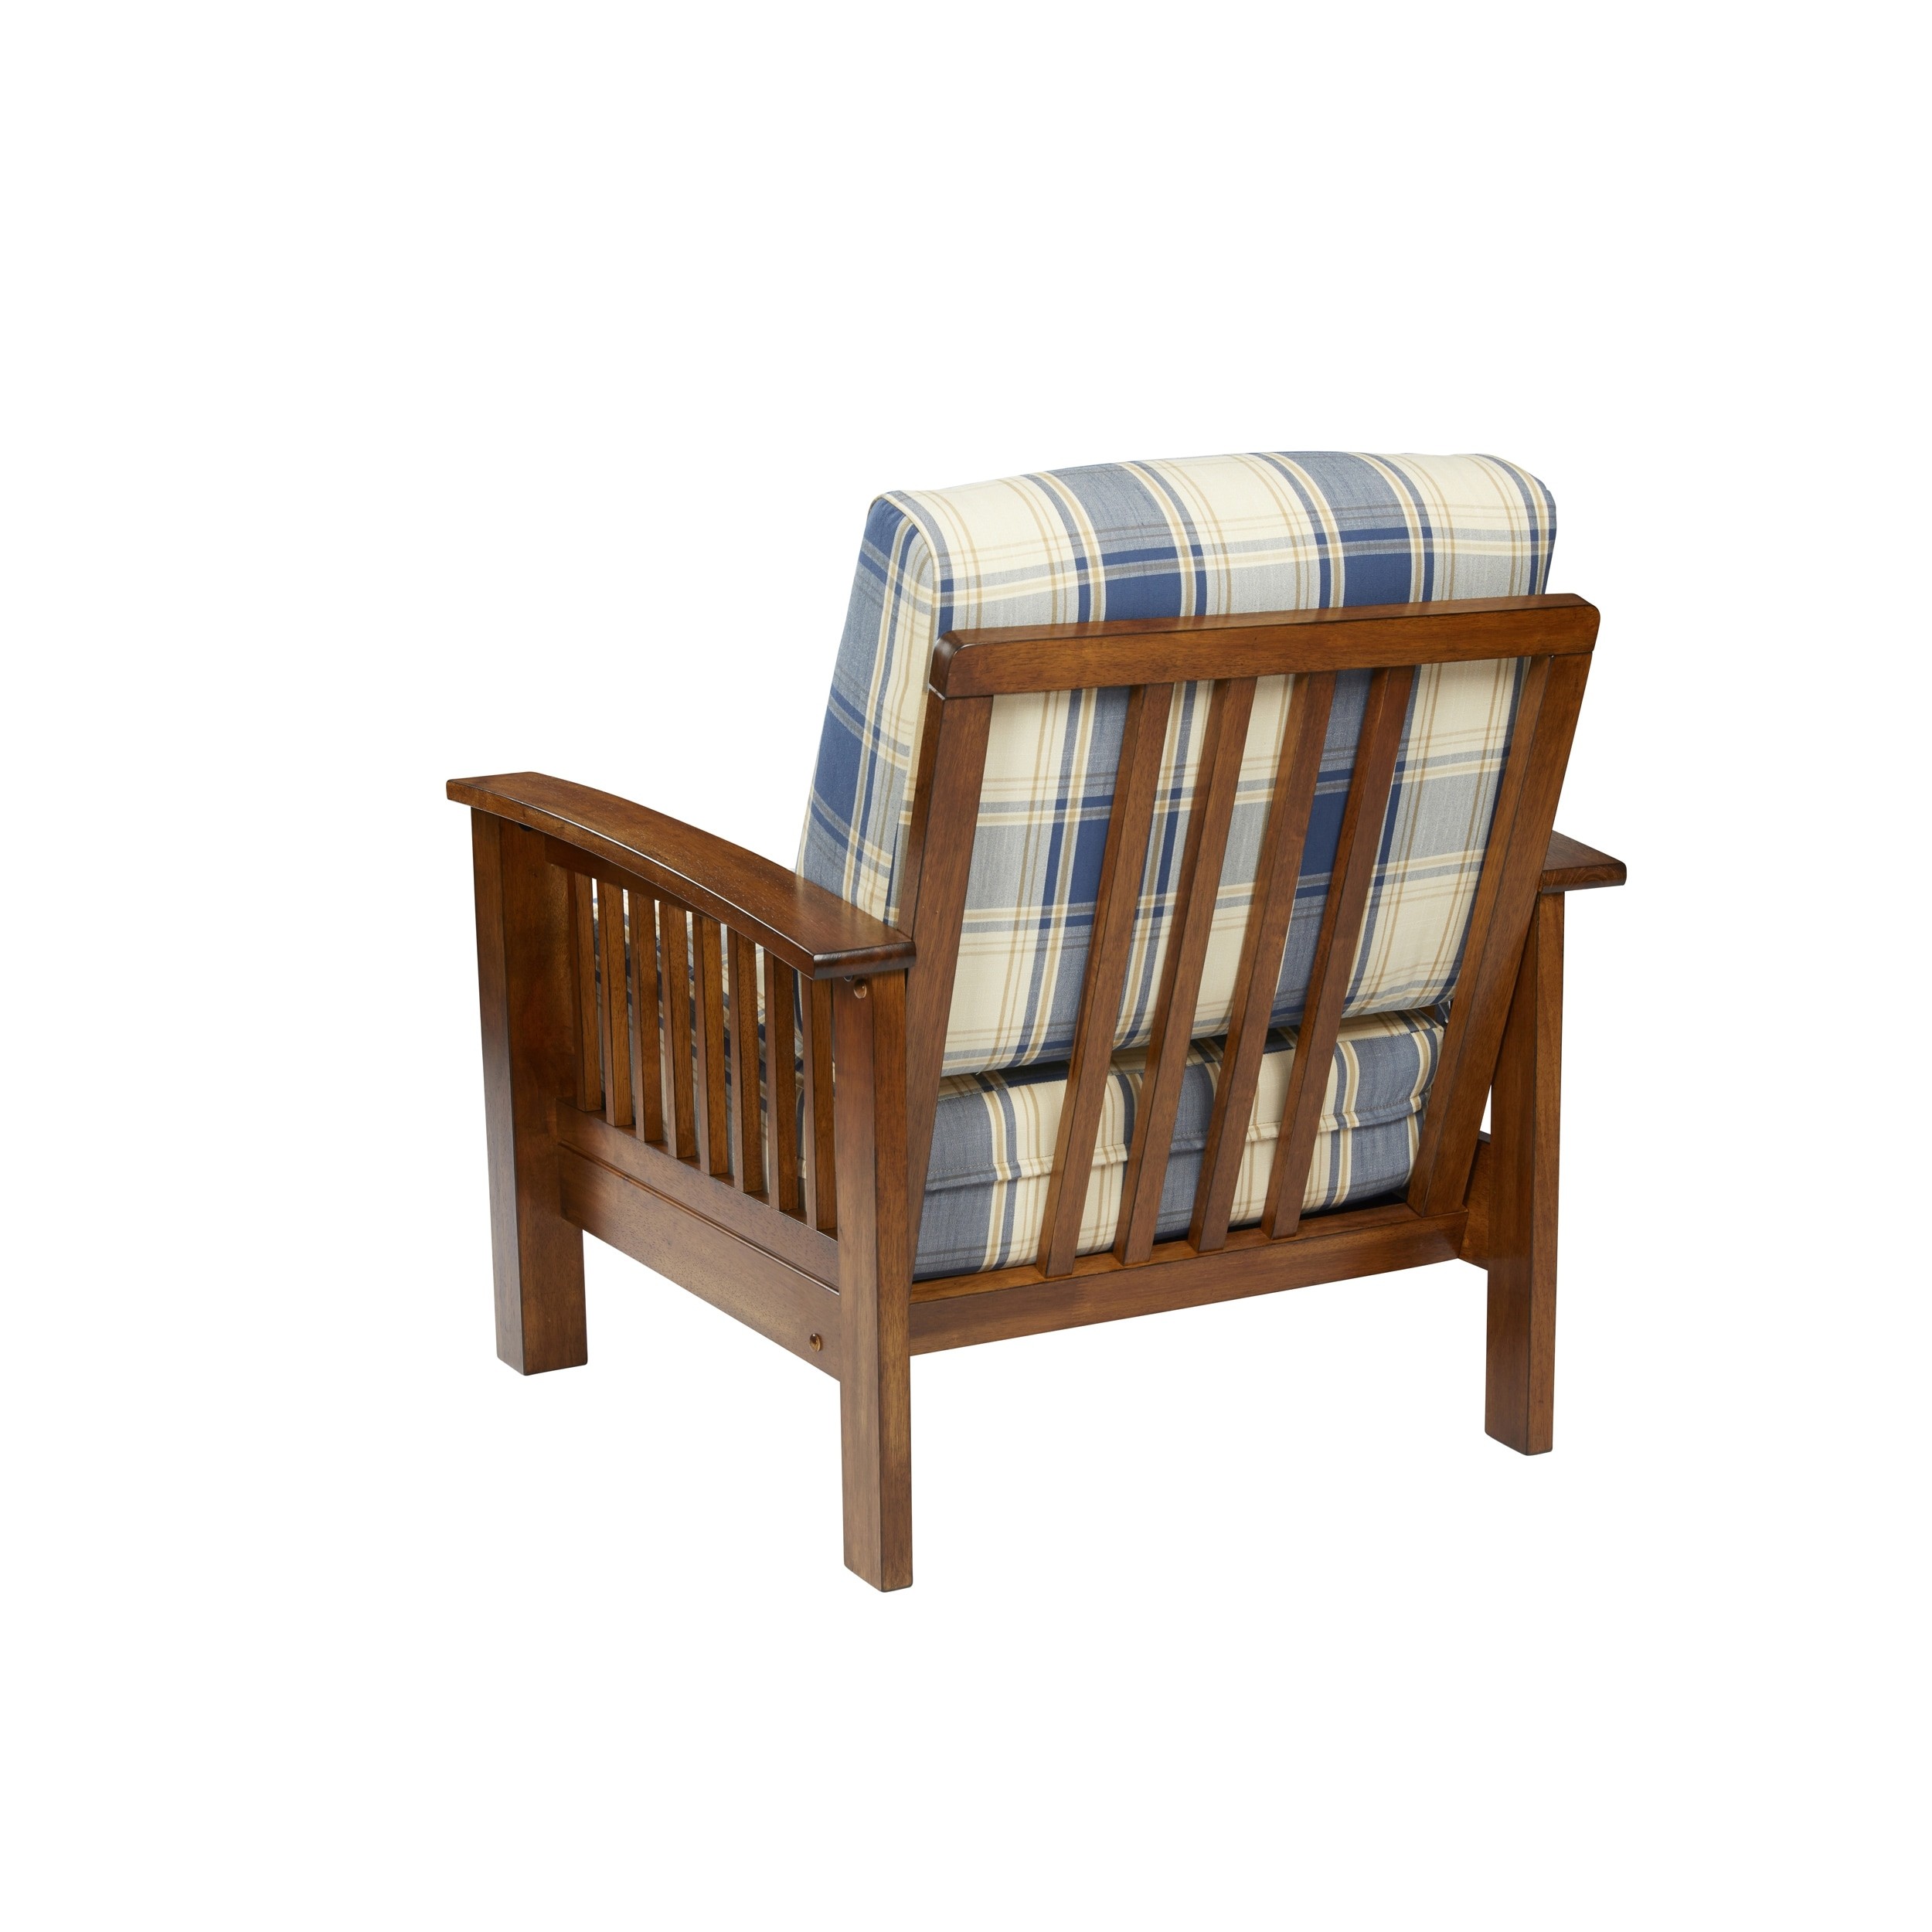 The gray barn blue plaid mission style arm chair blue